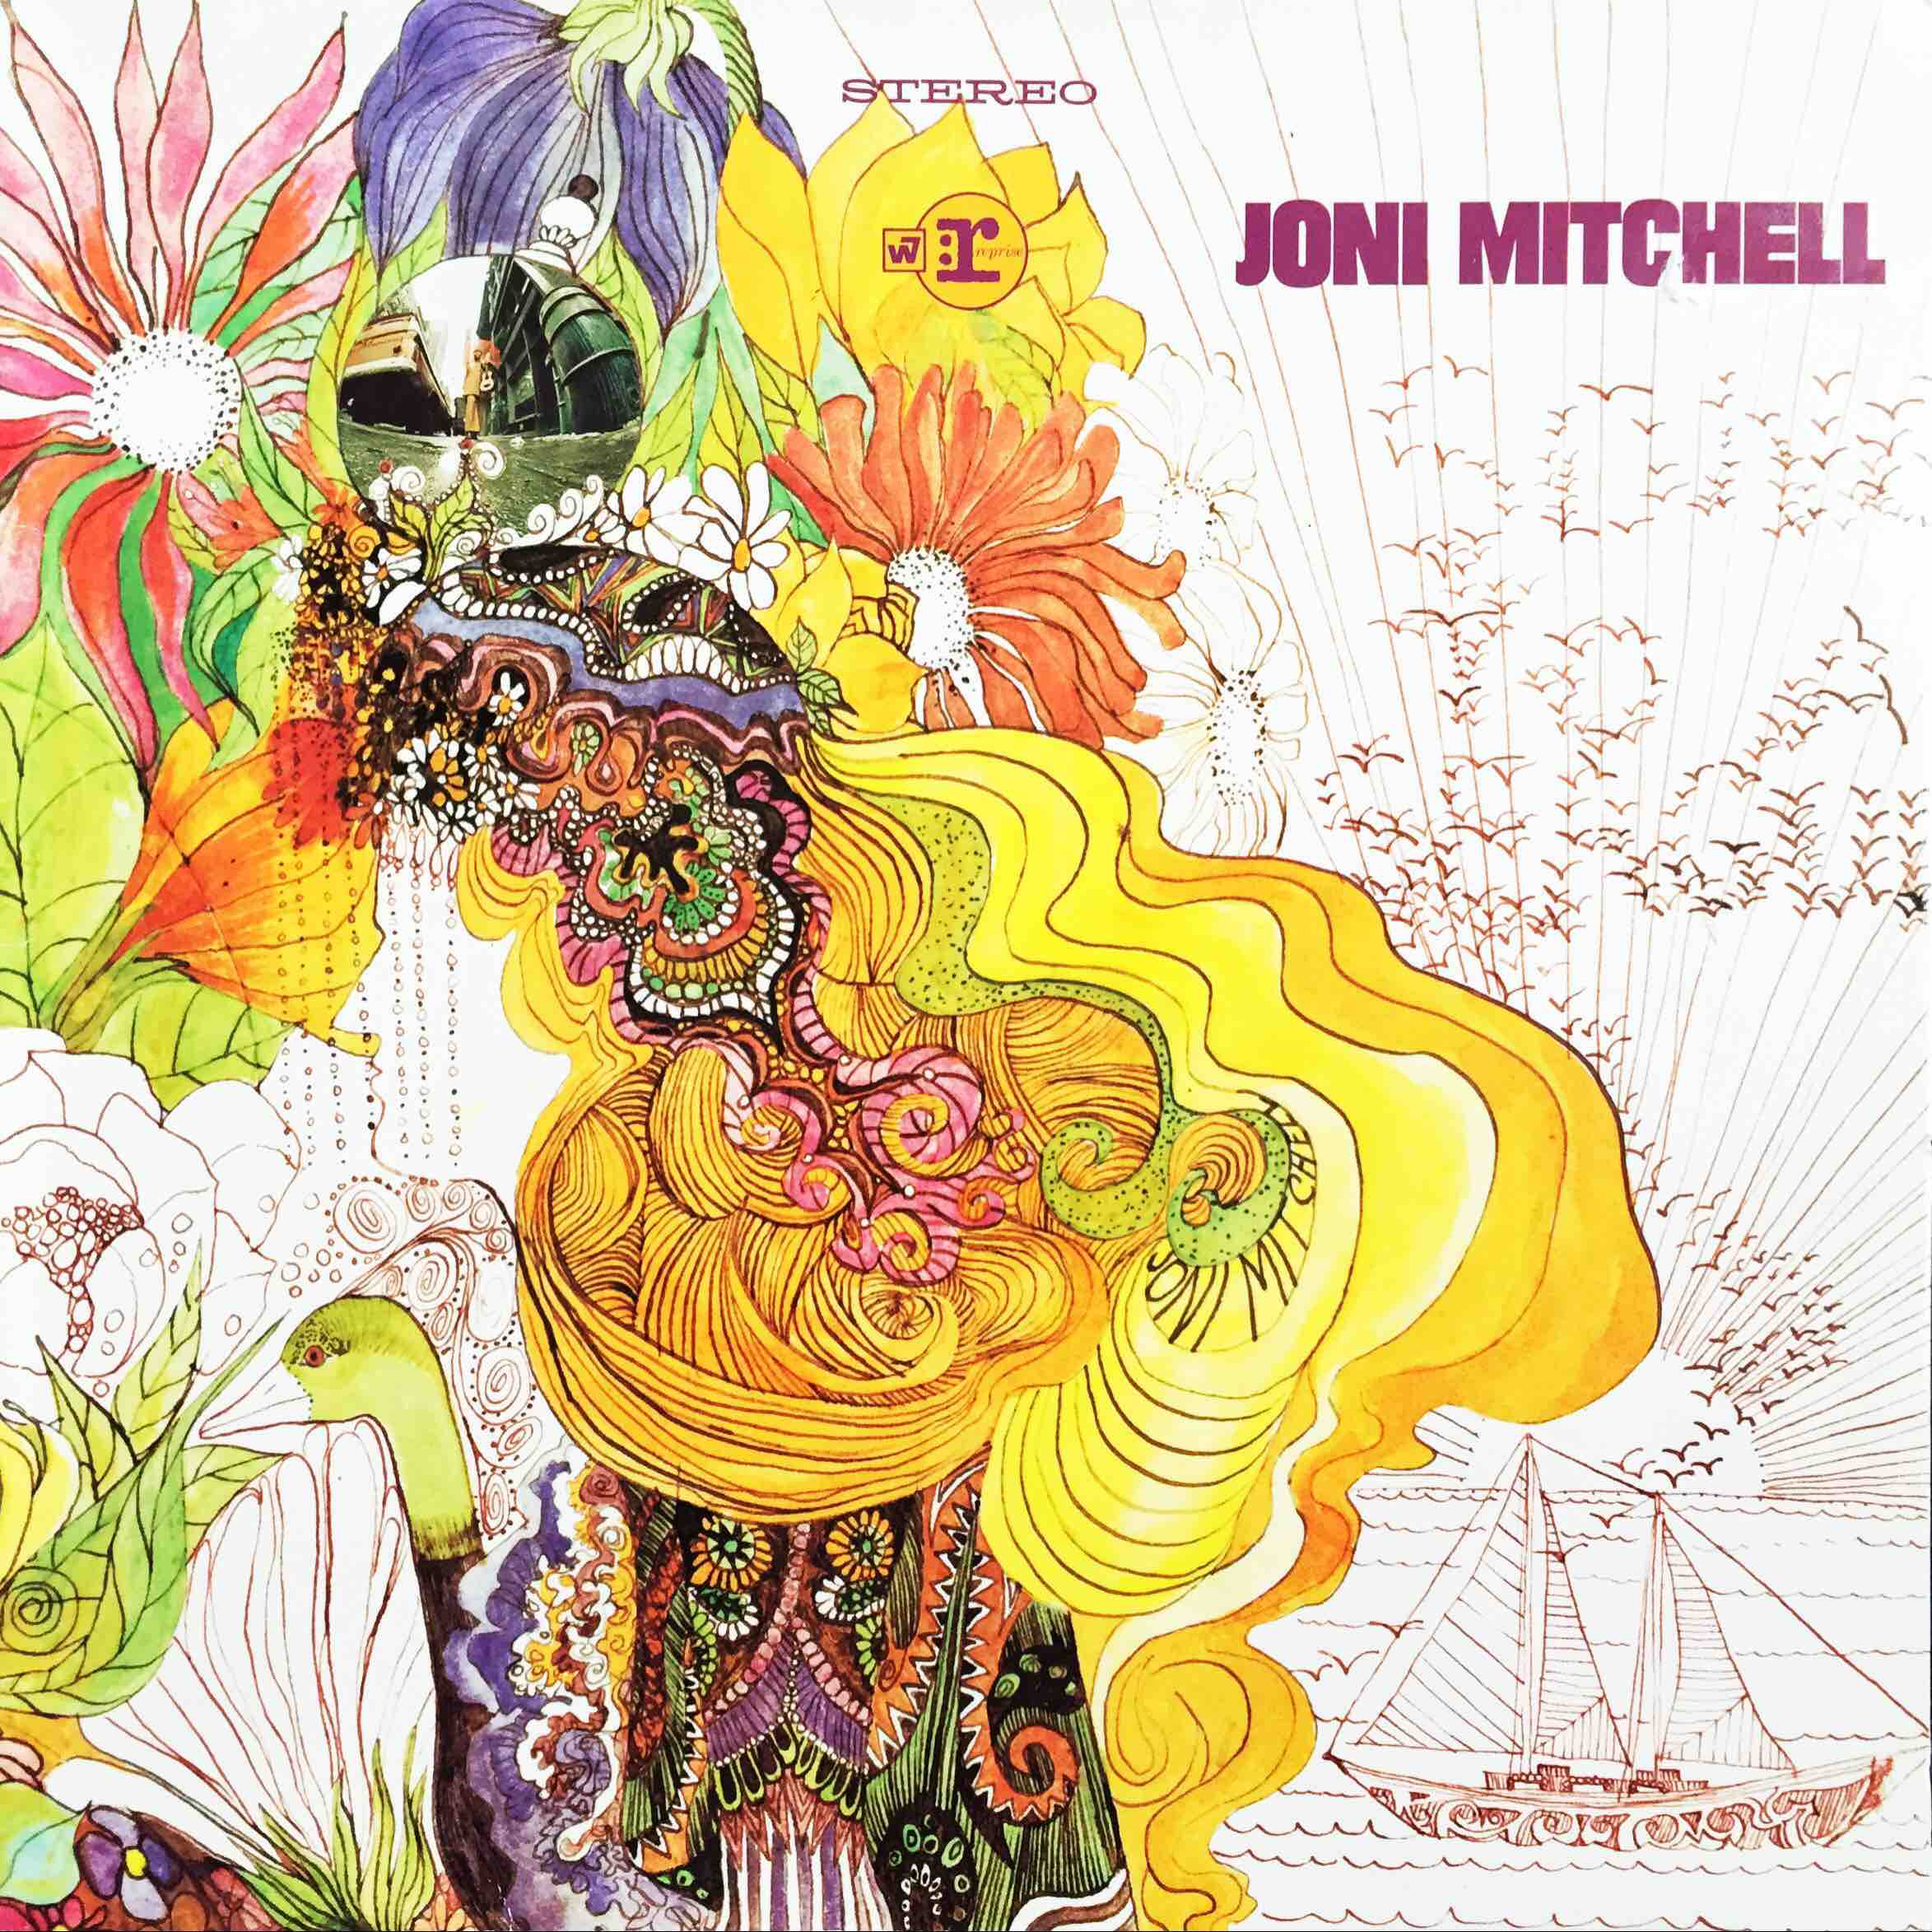 Joni Mitchell: Song To A Seagull (Reprise 1968).